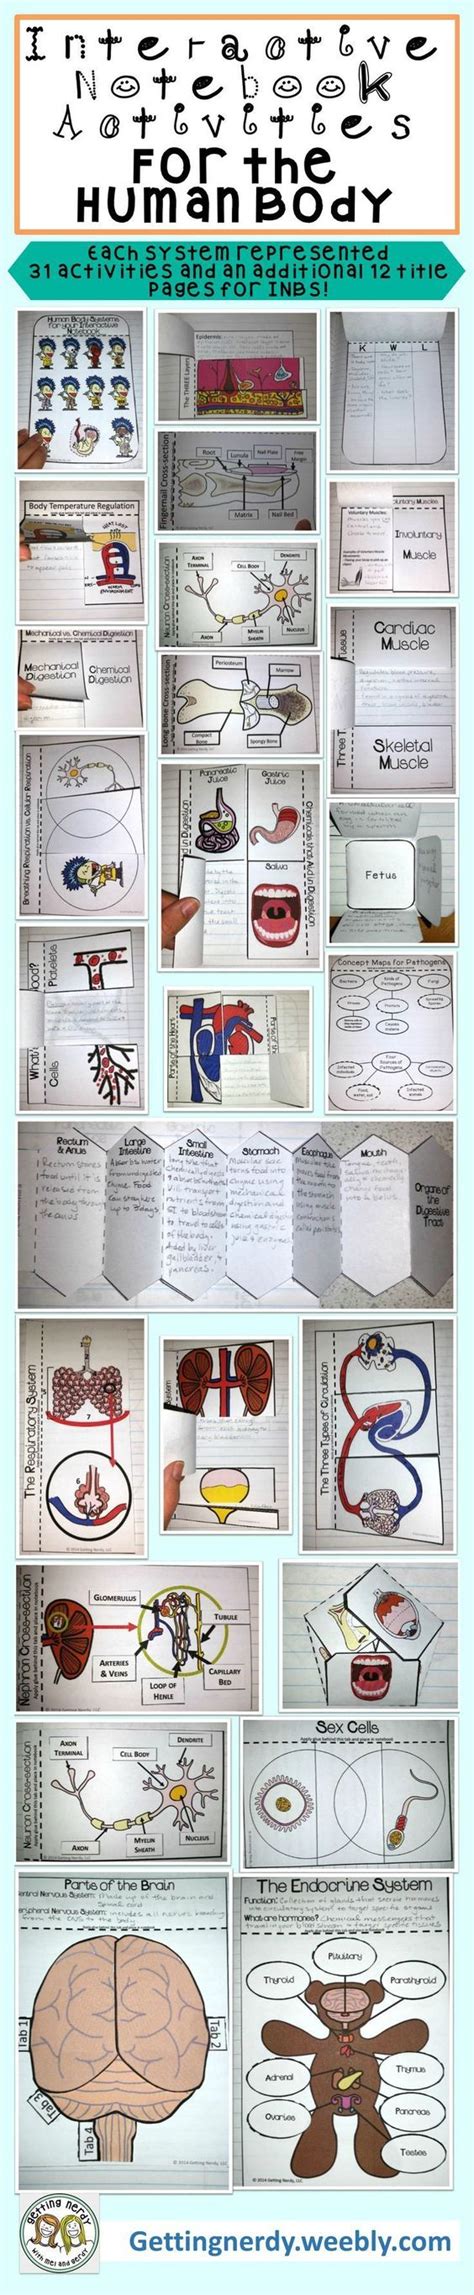 Human Body Systems - Science Interactive Notebook ...